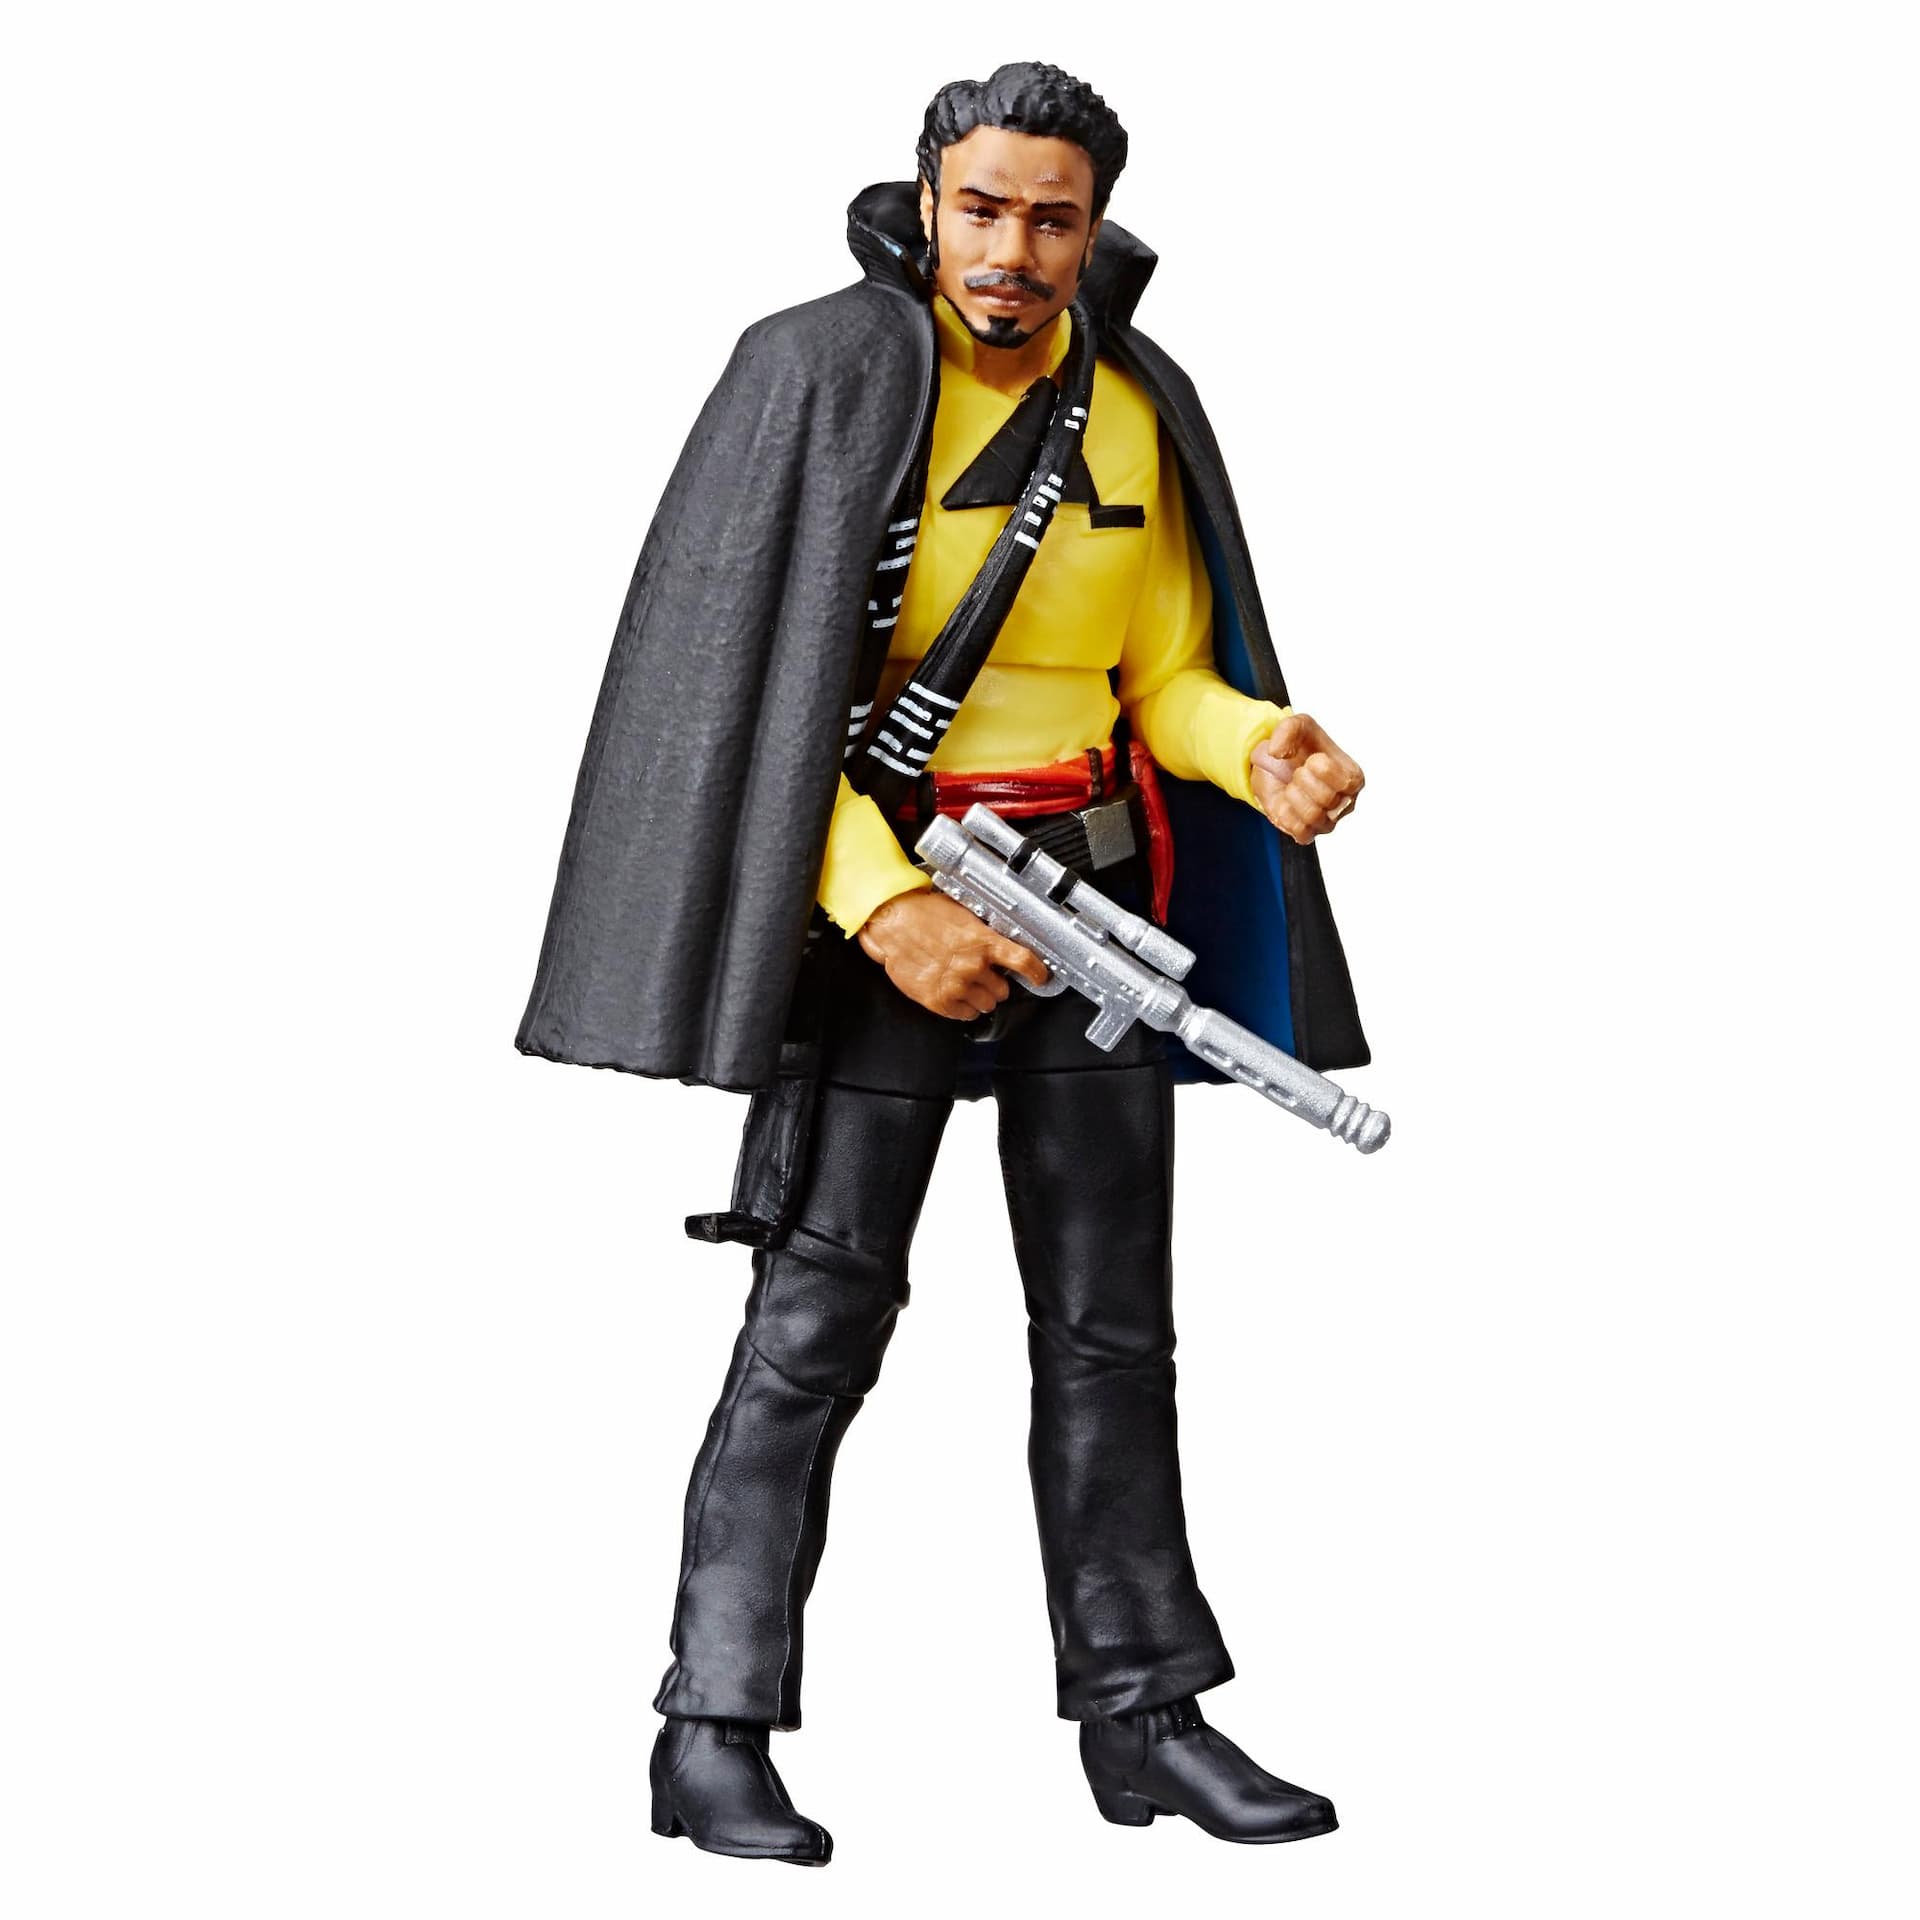 Star Wars The Vintage Collection Solo: A Star Wars Story Lando Calrissian 3.75-inch Figure